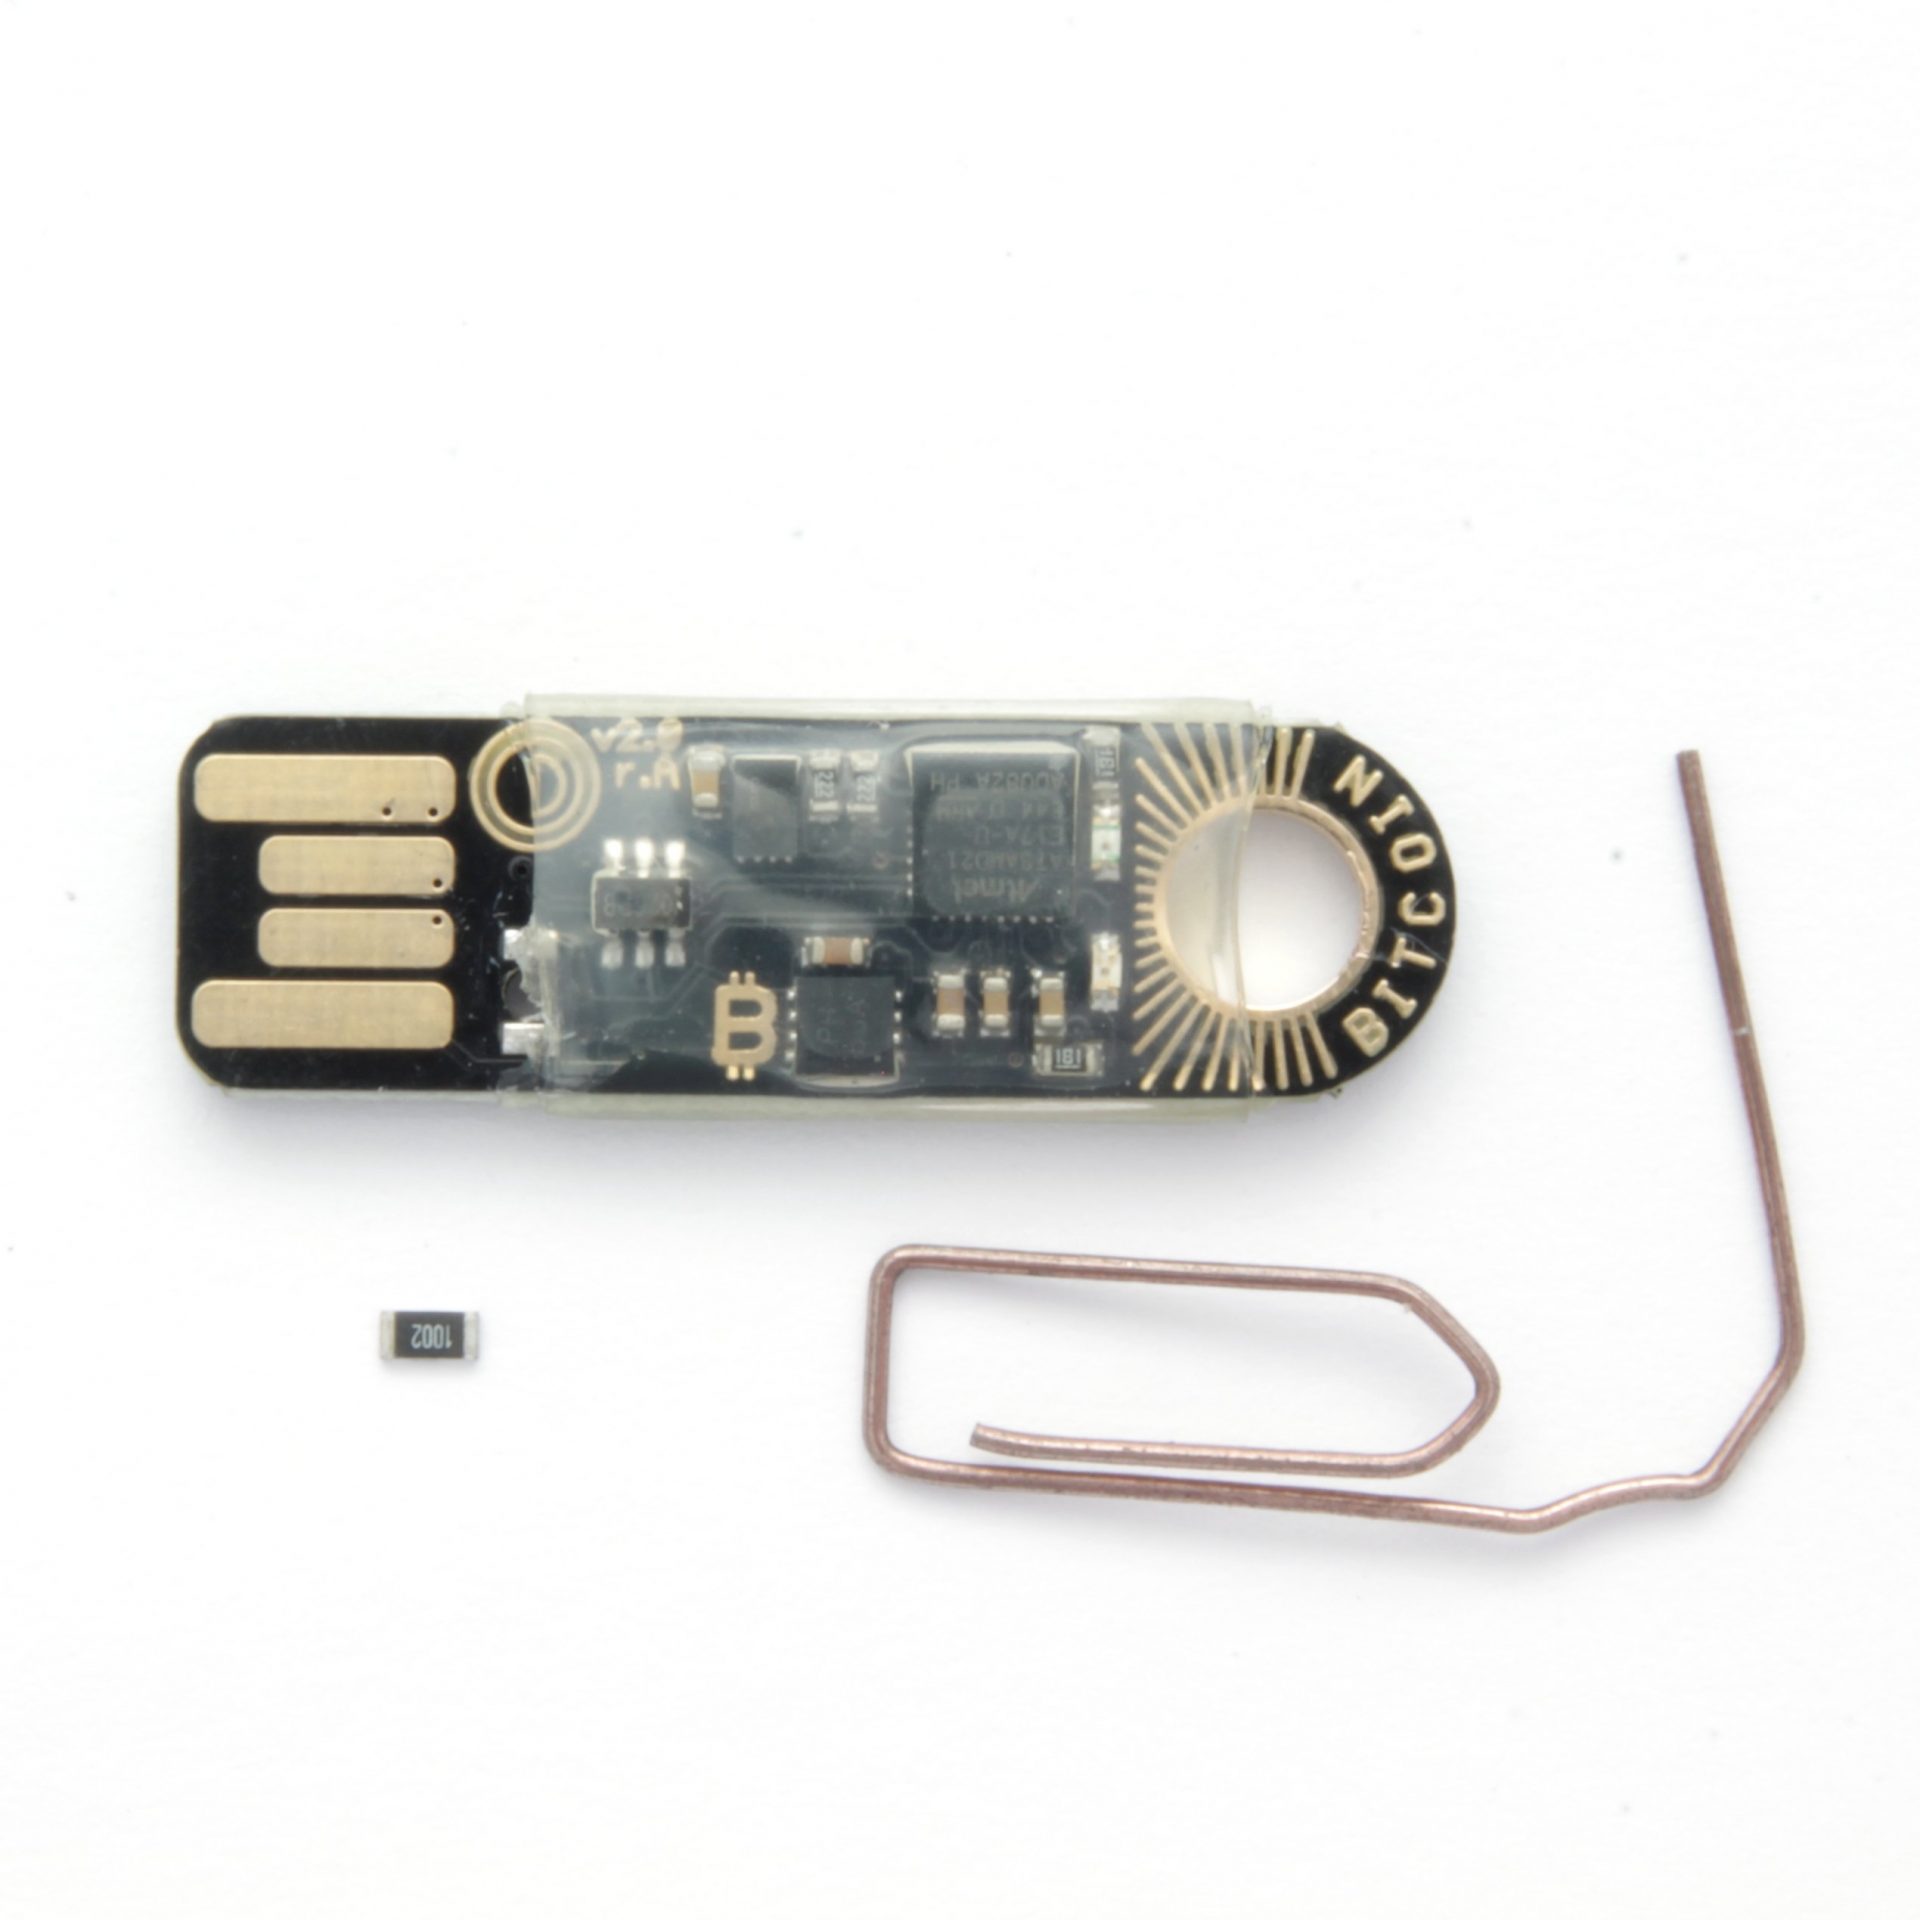 OPENDIME: Physical instantiation of Bitcoin